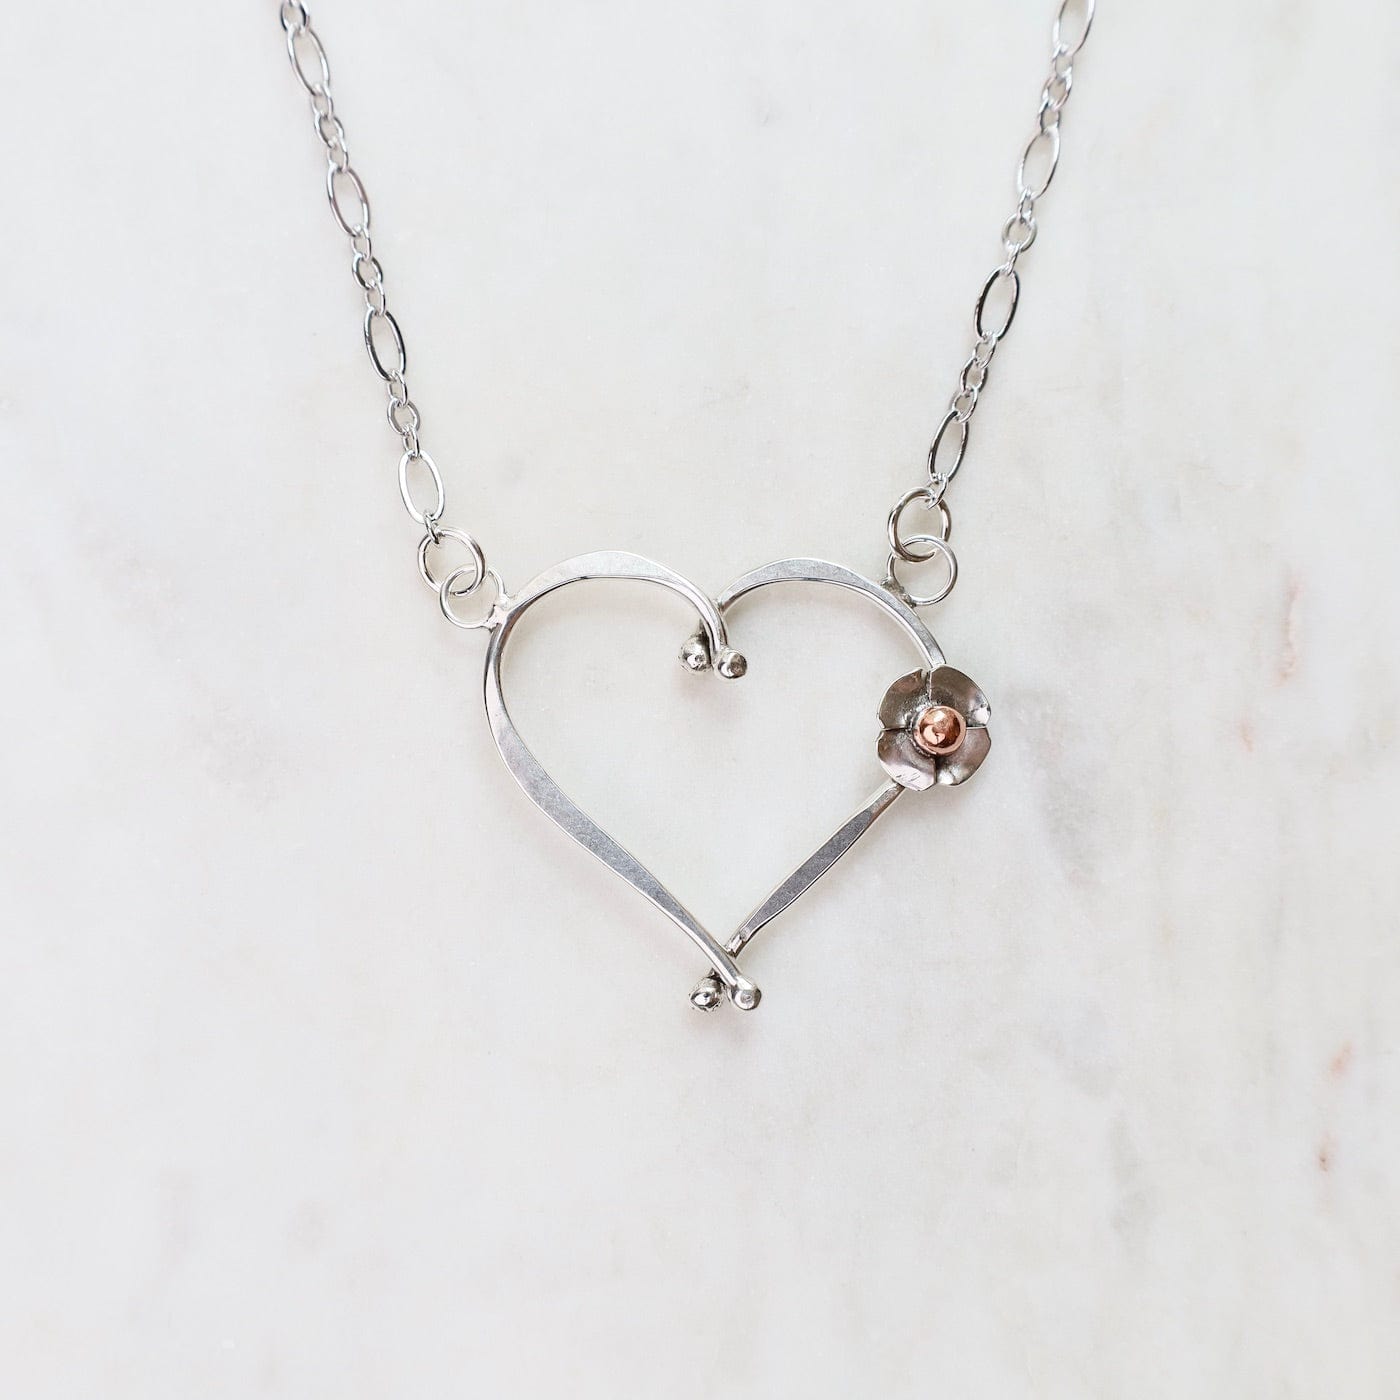 NKL Date Night Necklace